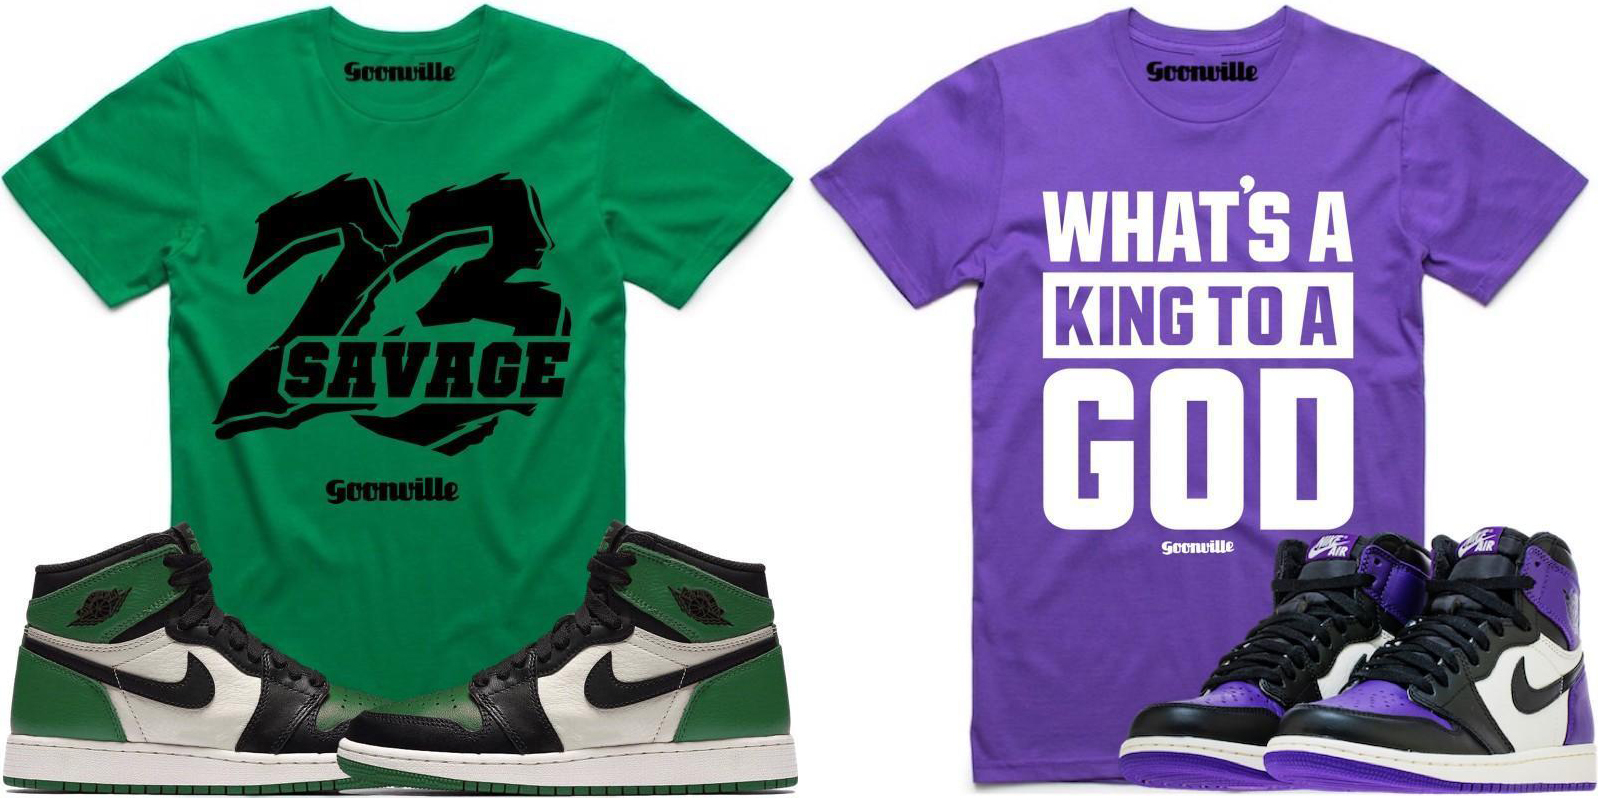 shirts to go with green jordan 1